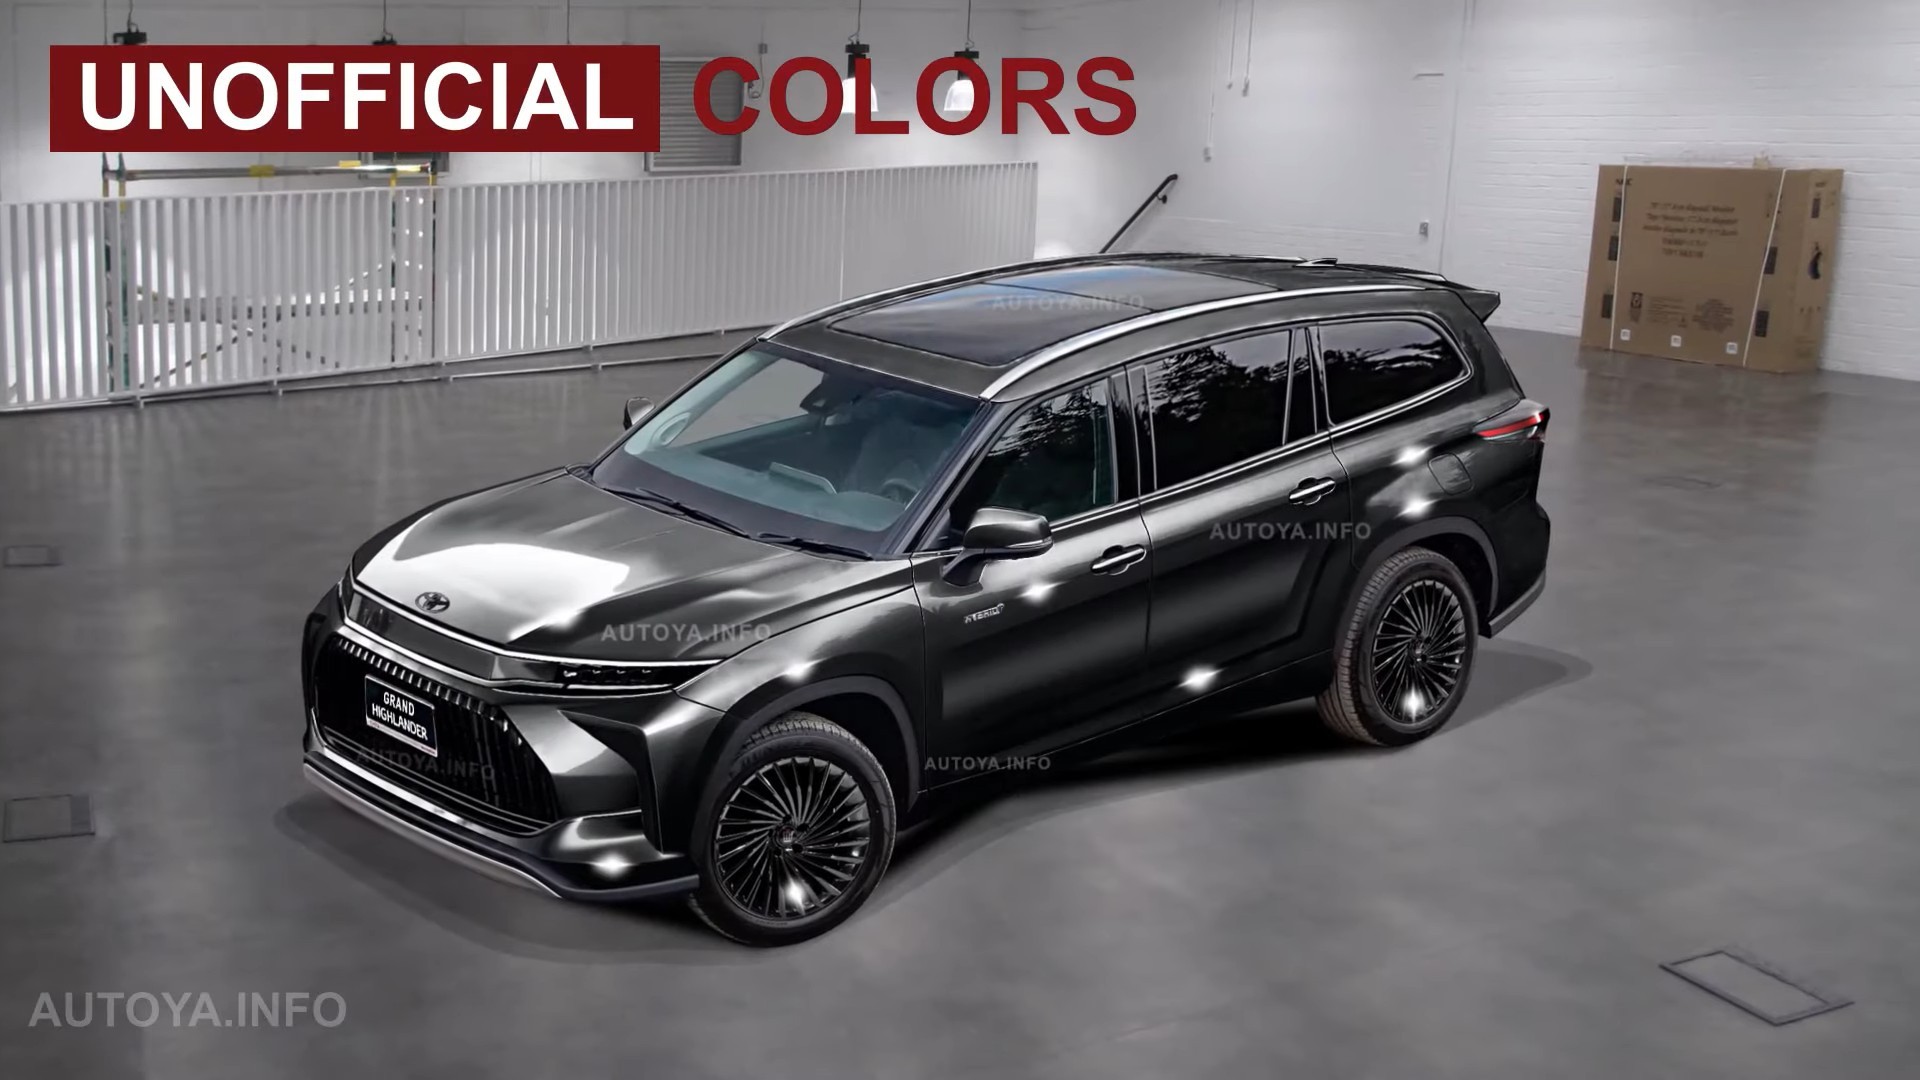 Full-Size Toyota Grand Highlander 8-Seat CUV Unofficially Depicted in Posh  Colors - autoevolution